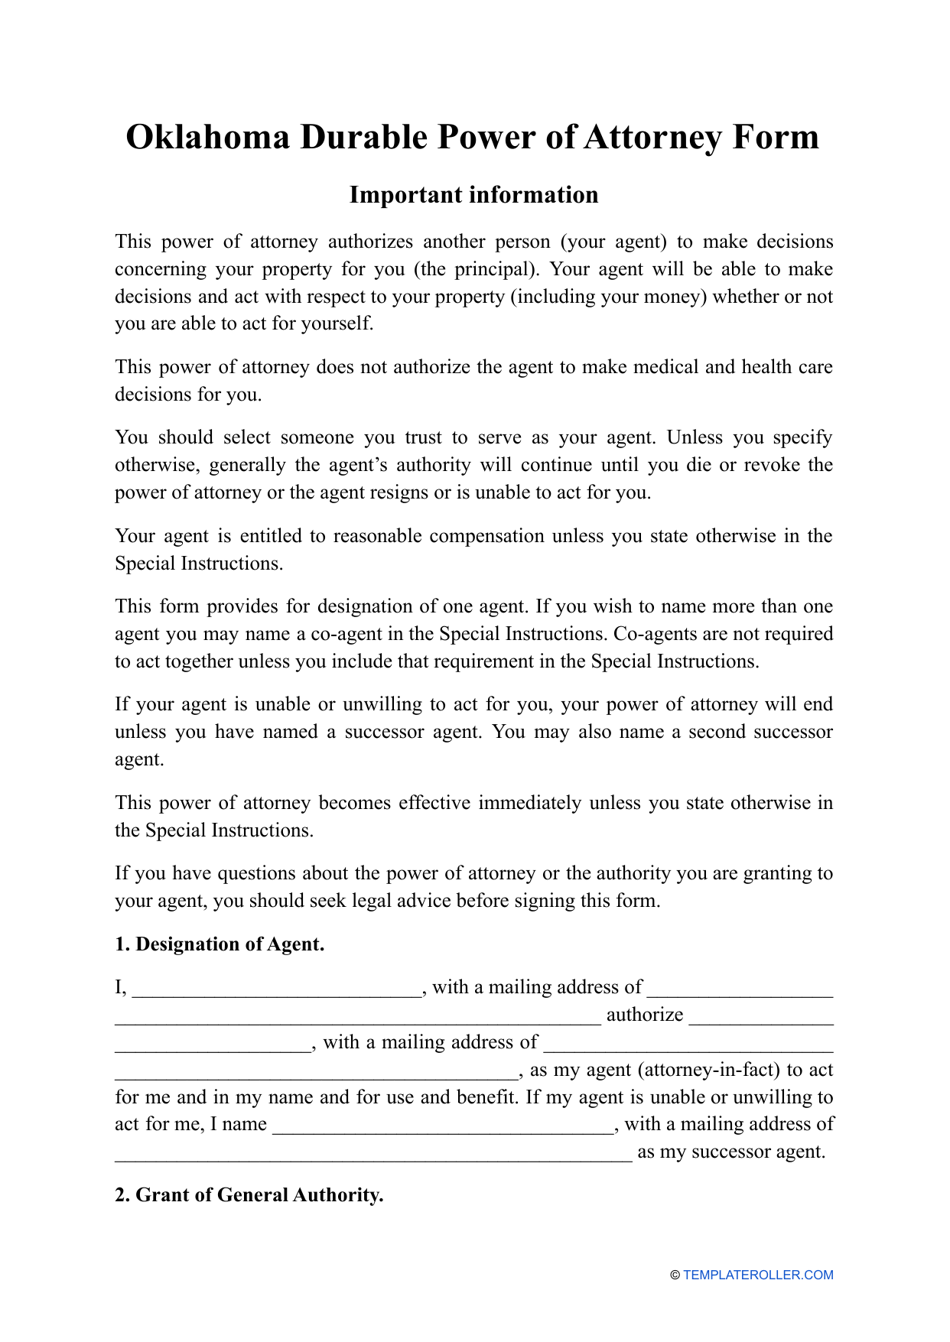 Durable Power of Attorney Form - Oklahoma, Page 1